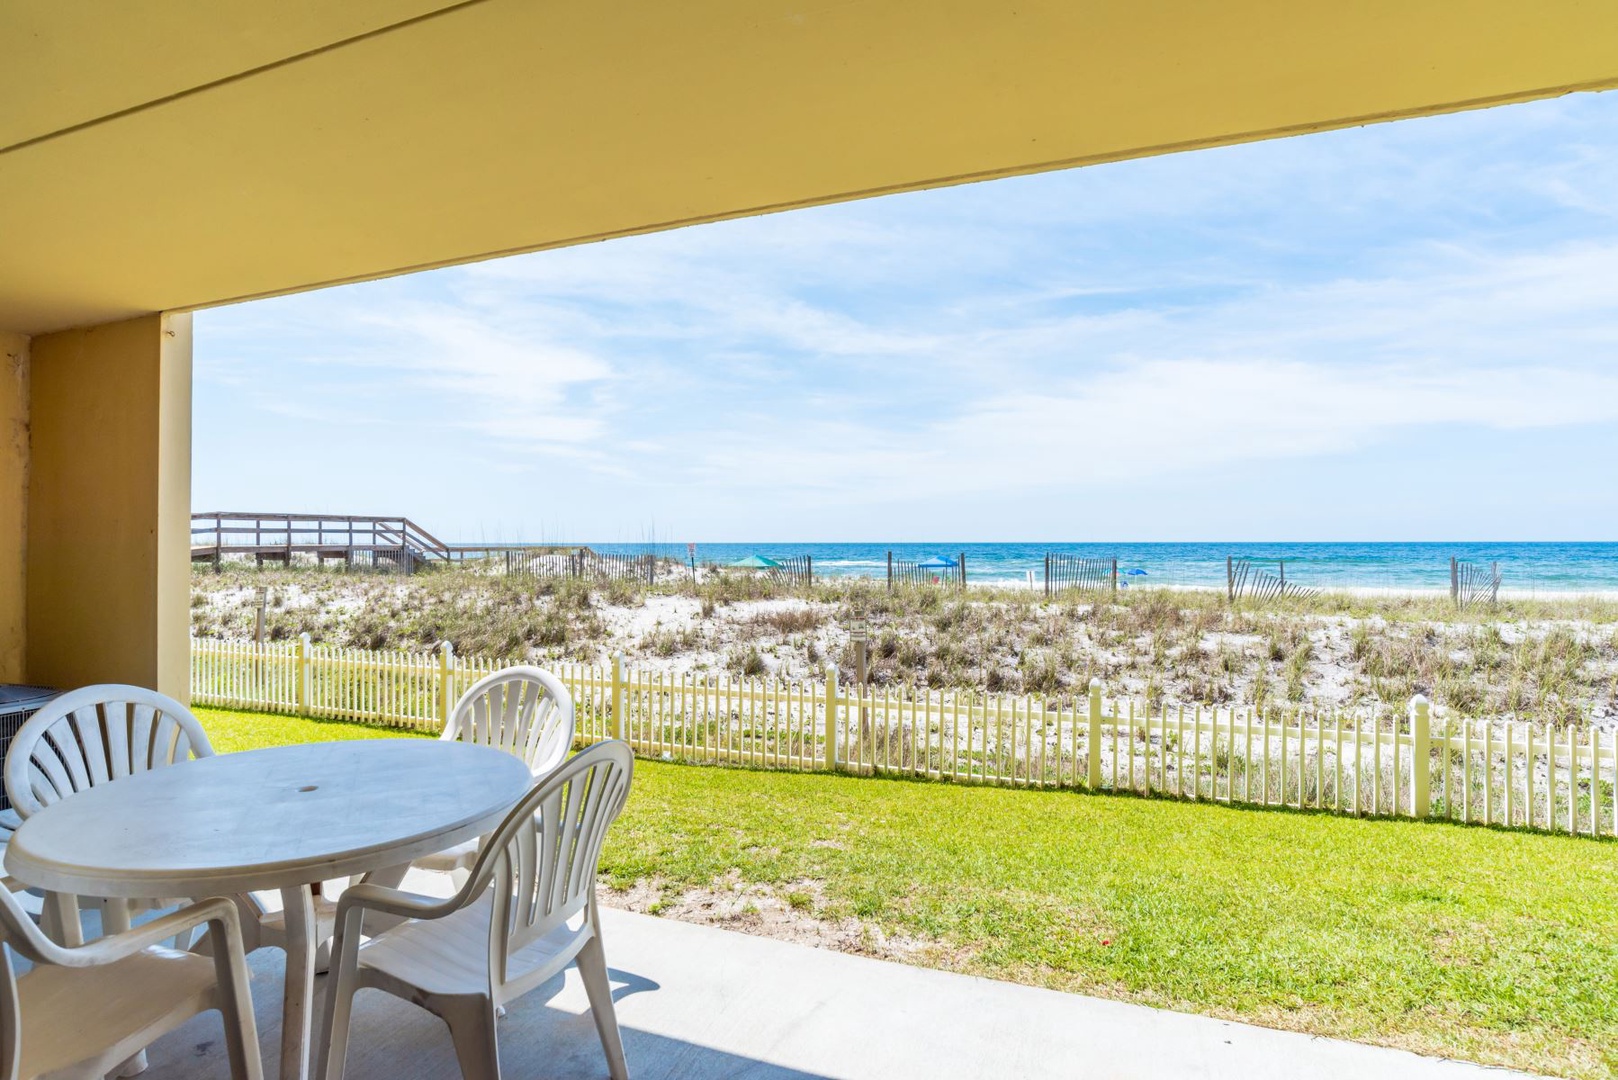 Ocean Breeze West Unit 104 Patio and Great View Of Beach